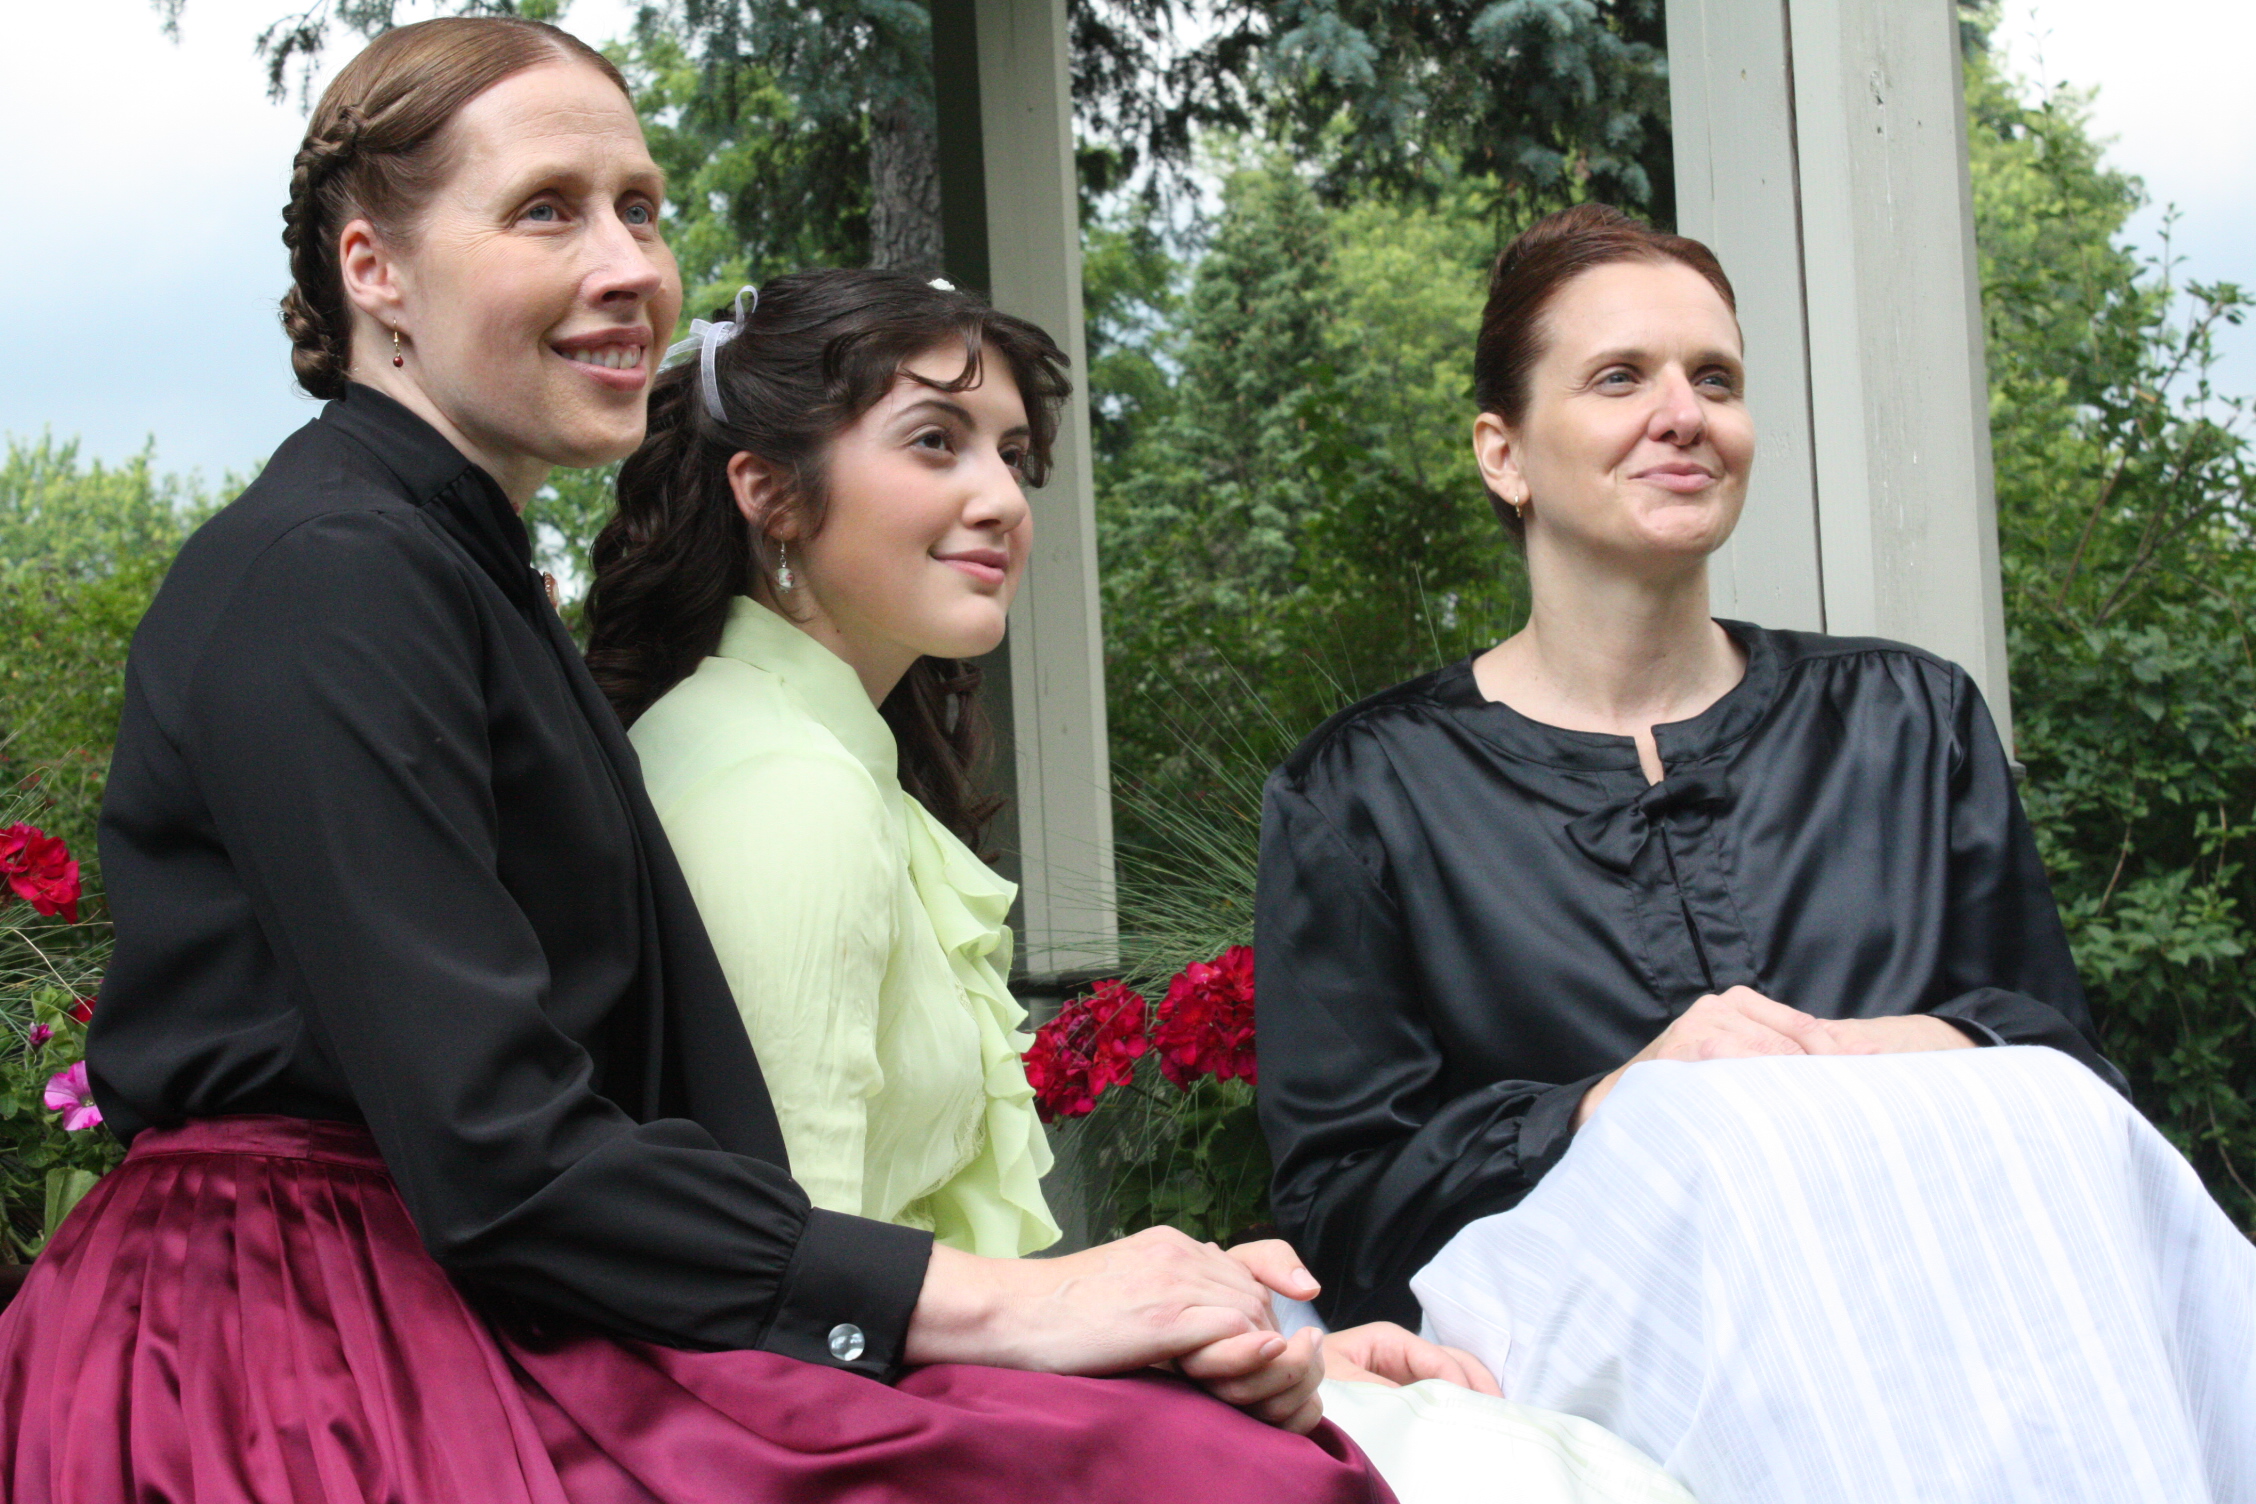 Actresses Carrie Kot, Mary Rose Maher, and Cynthia McCune on the set of the movie Leonie!